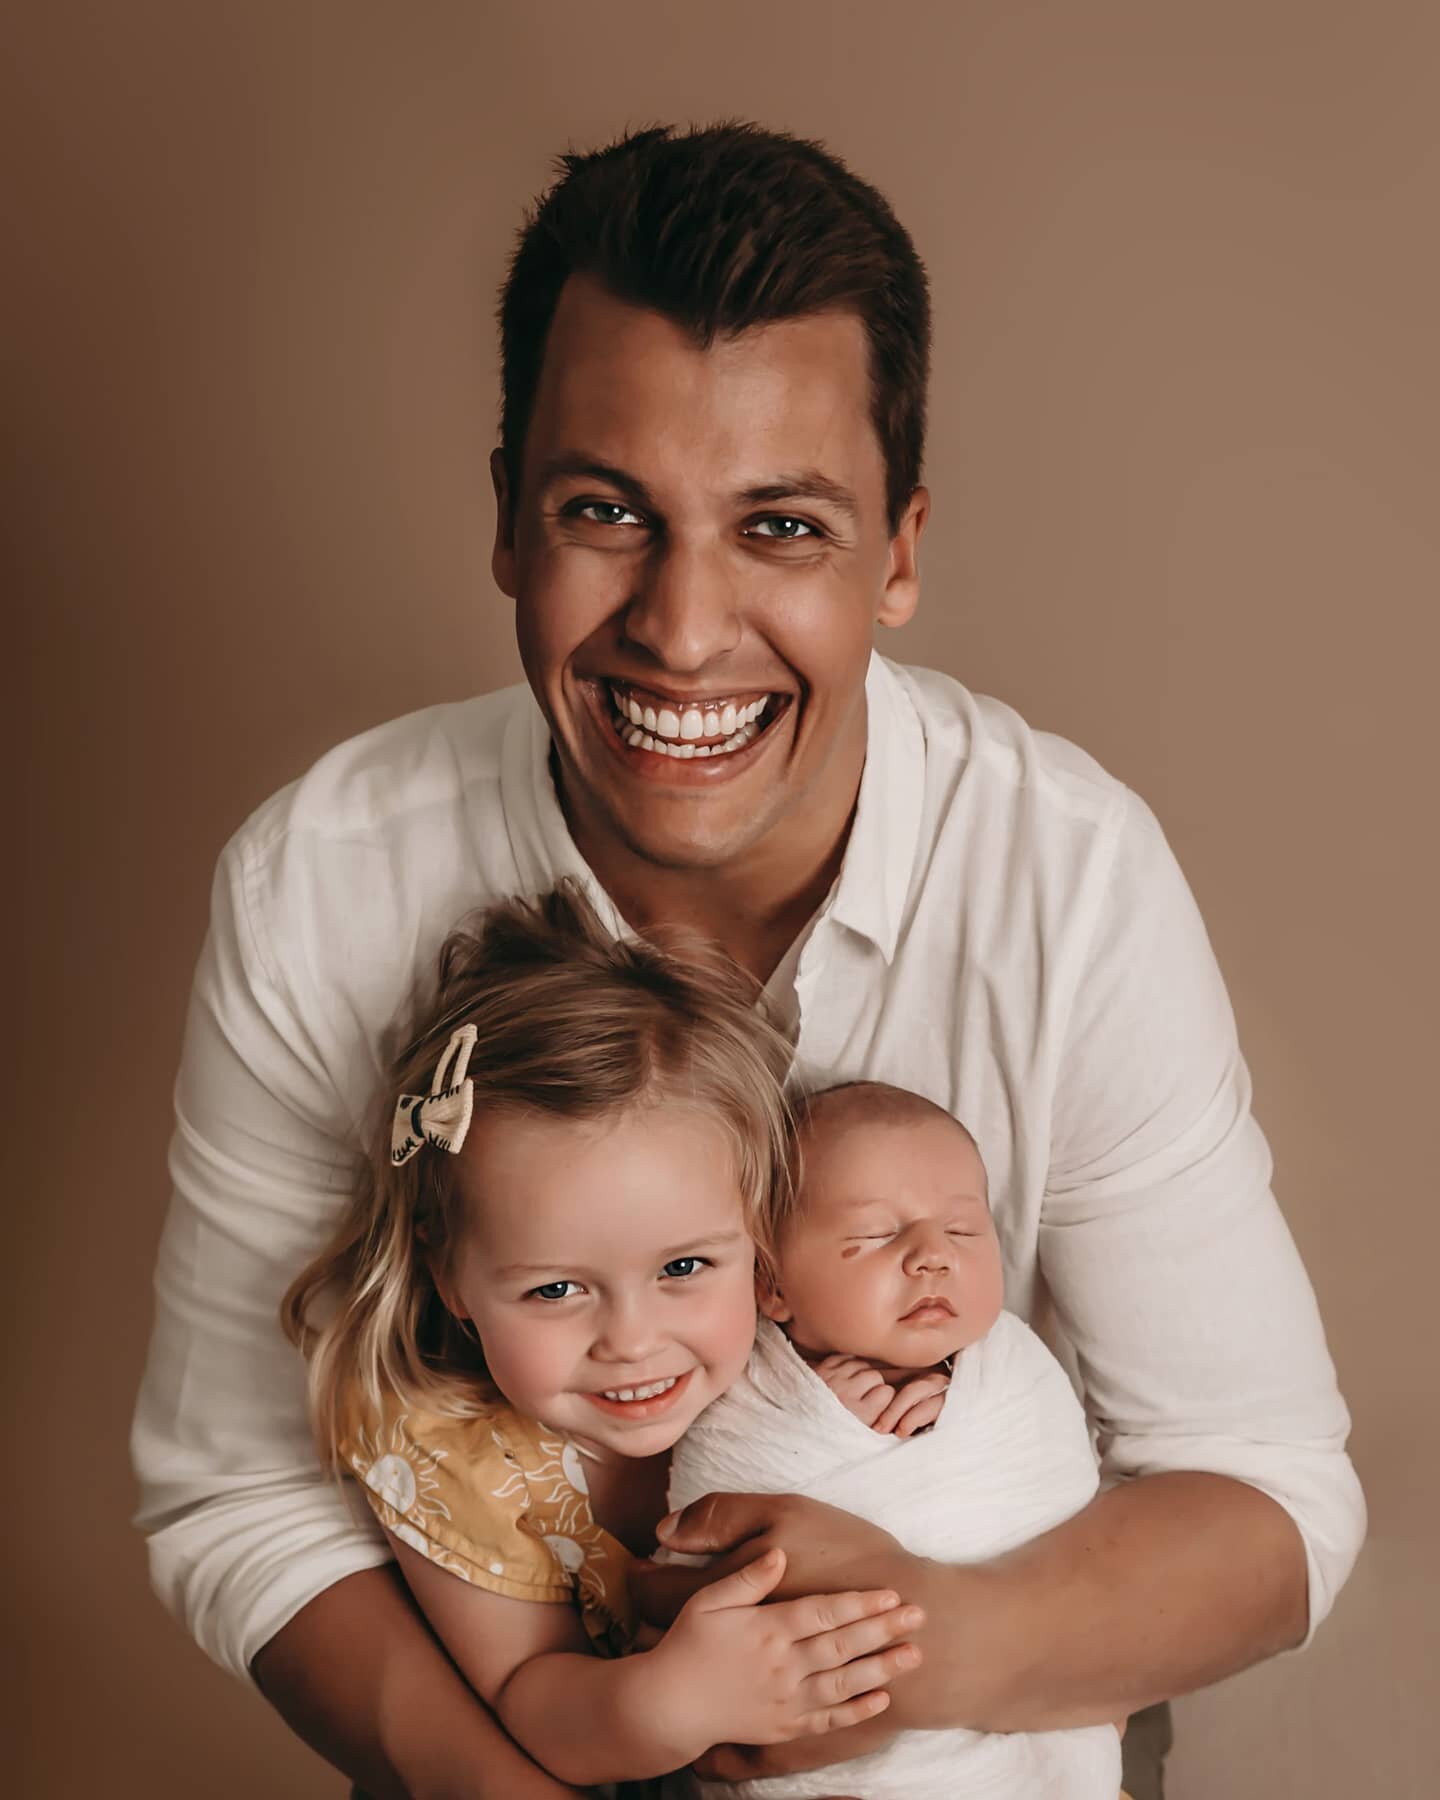 Proud Dad with his beautiful little girls. A memory to cherish for ever. 

Torge is an old co-worker. I specifically remember him being one of the most honest and dedicated professionals you'll ever meet. If you're buying or selling and need a real e